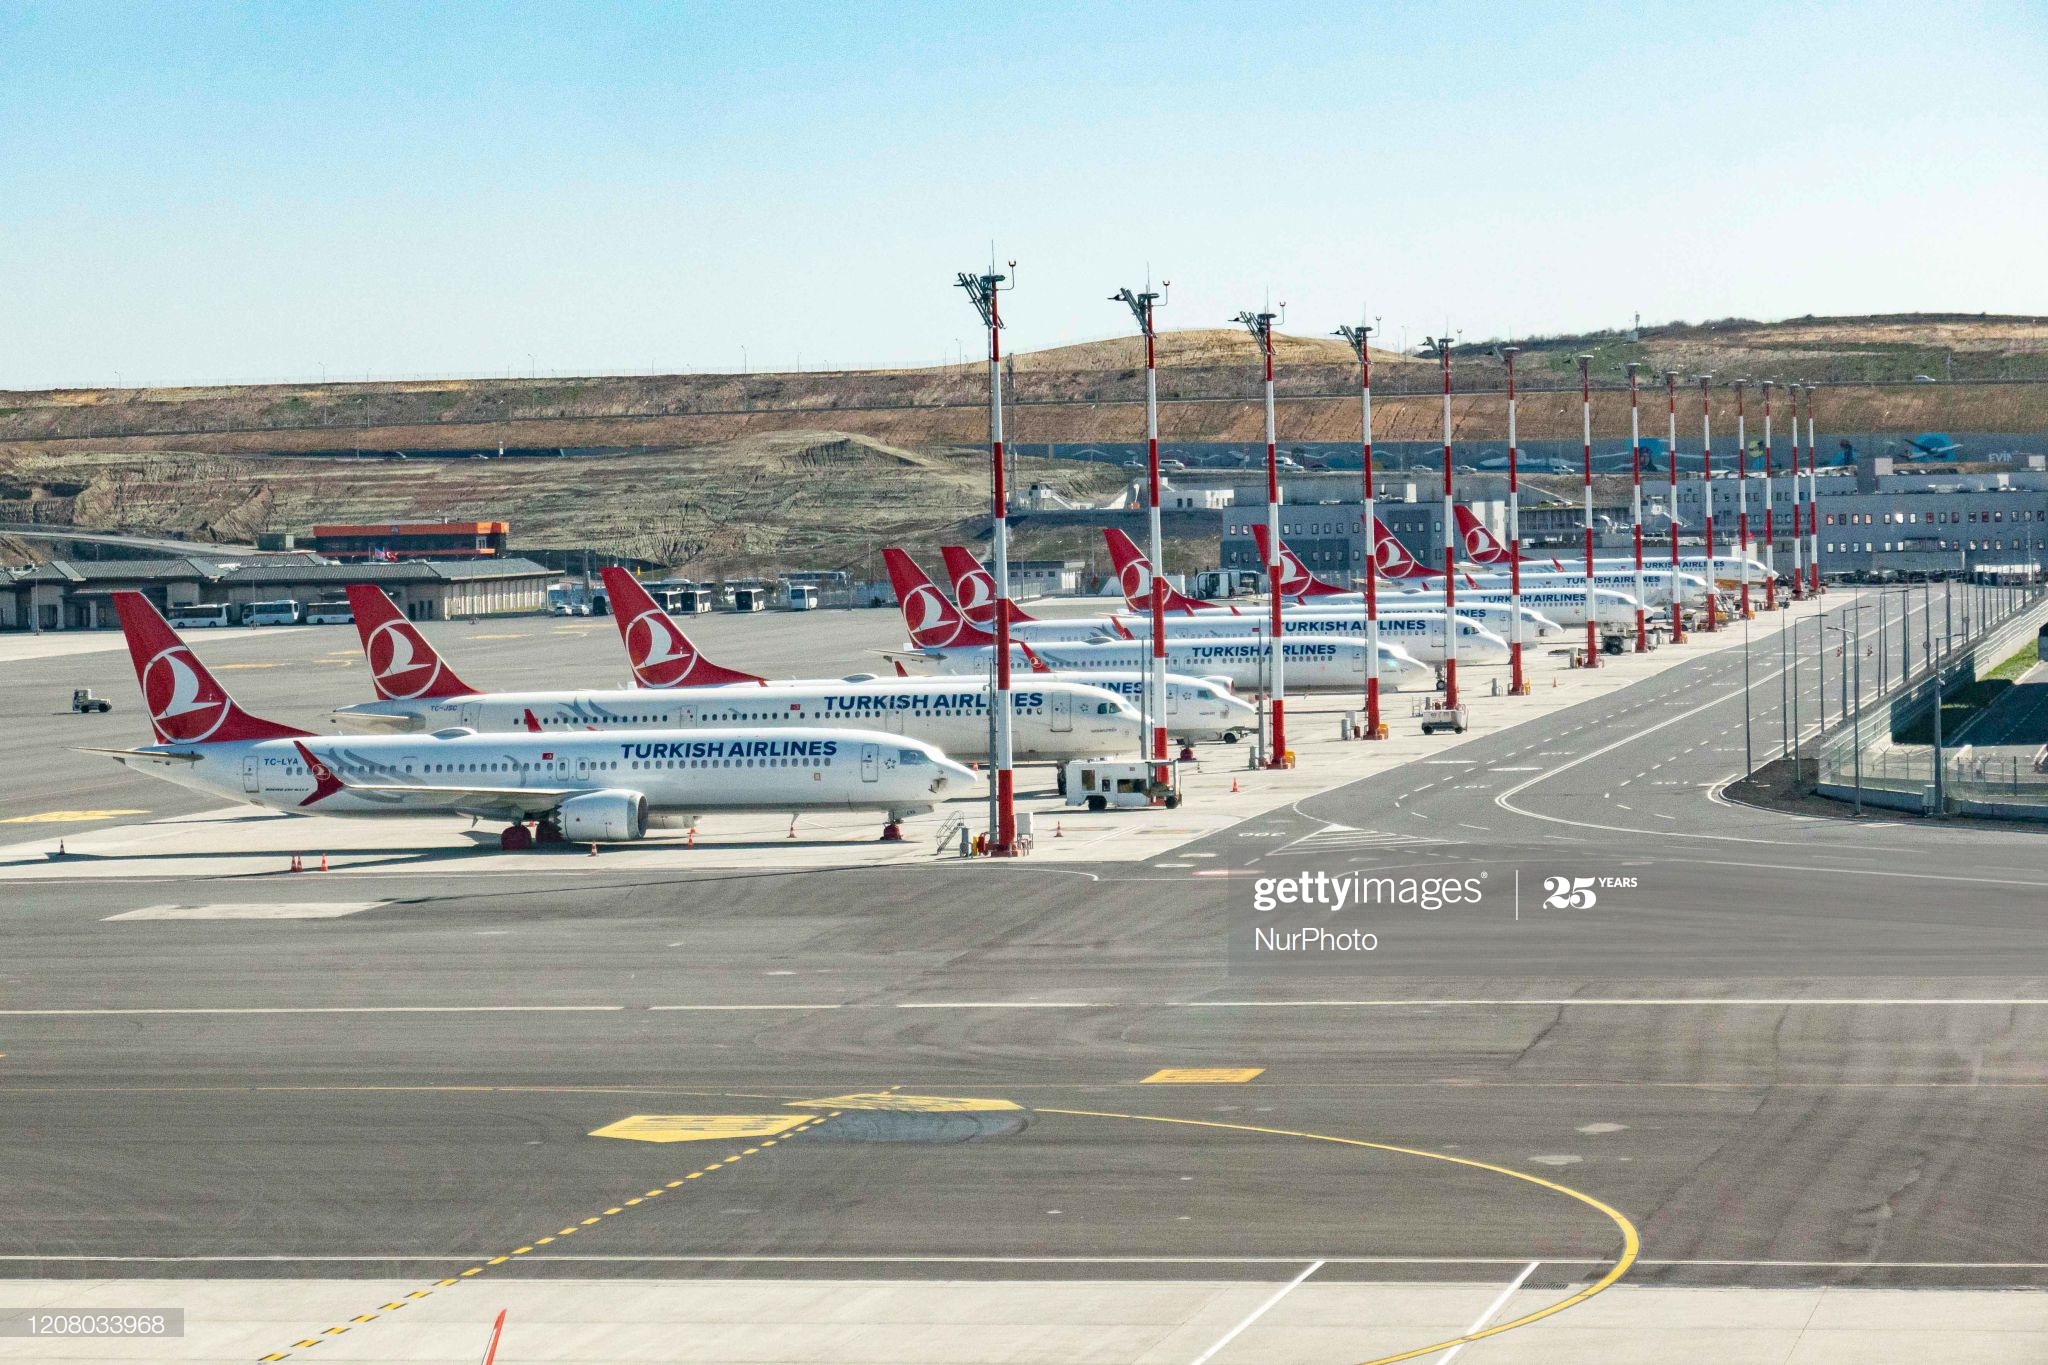 grounded-fleet-of-turkish-airlines-tk-airplanes-sit-on-the-tarmac-at-picture-id1208033968